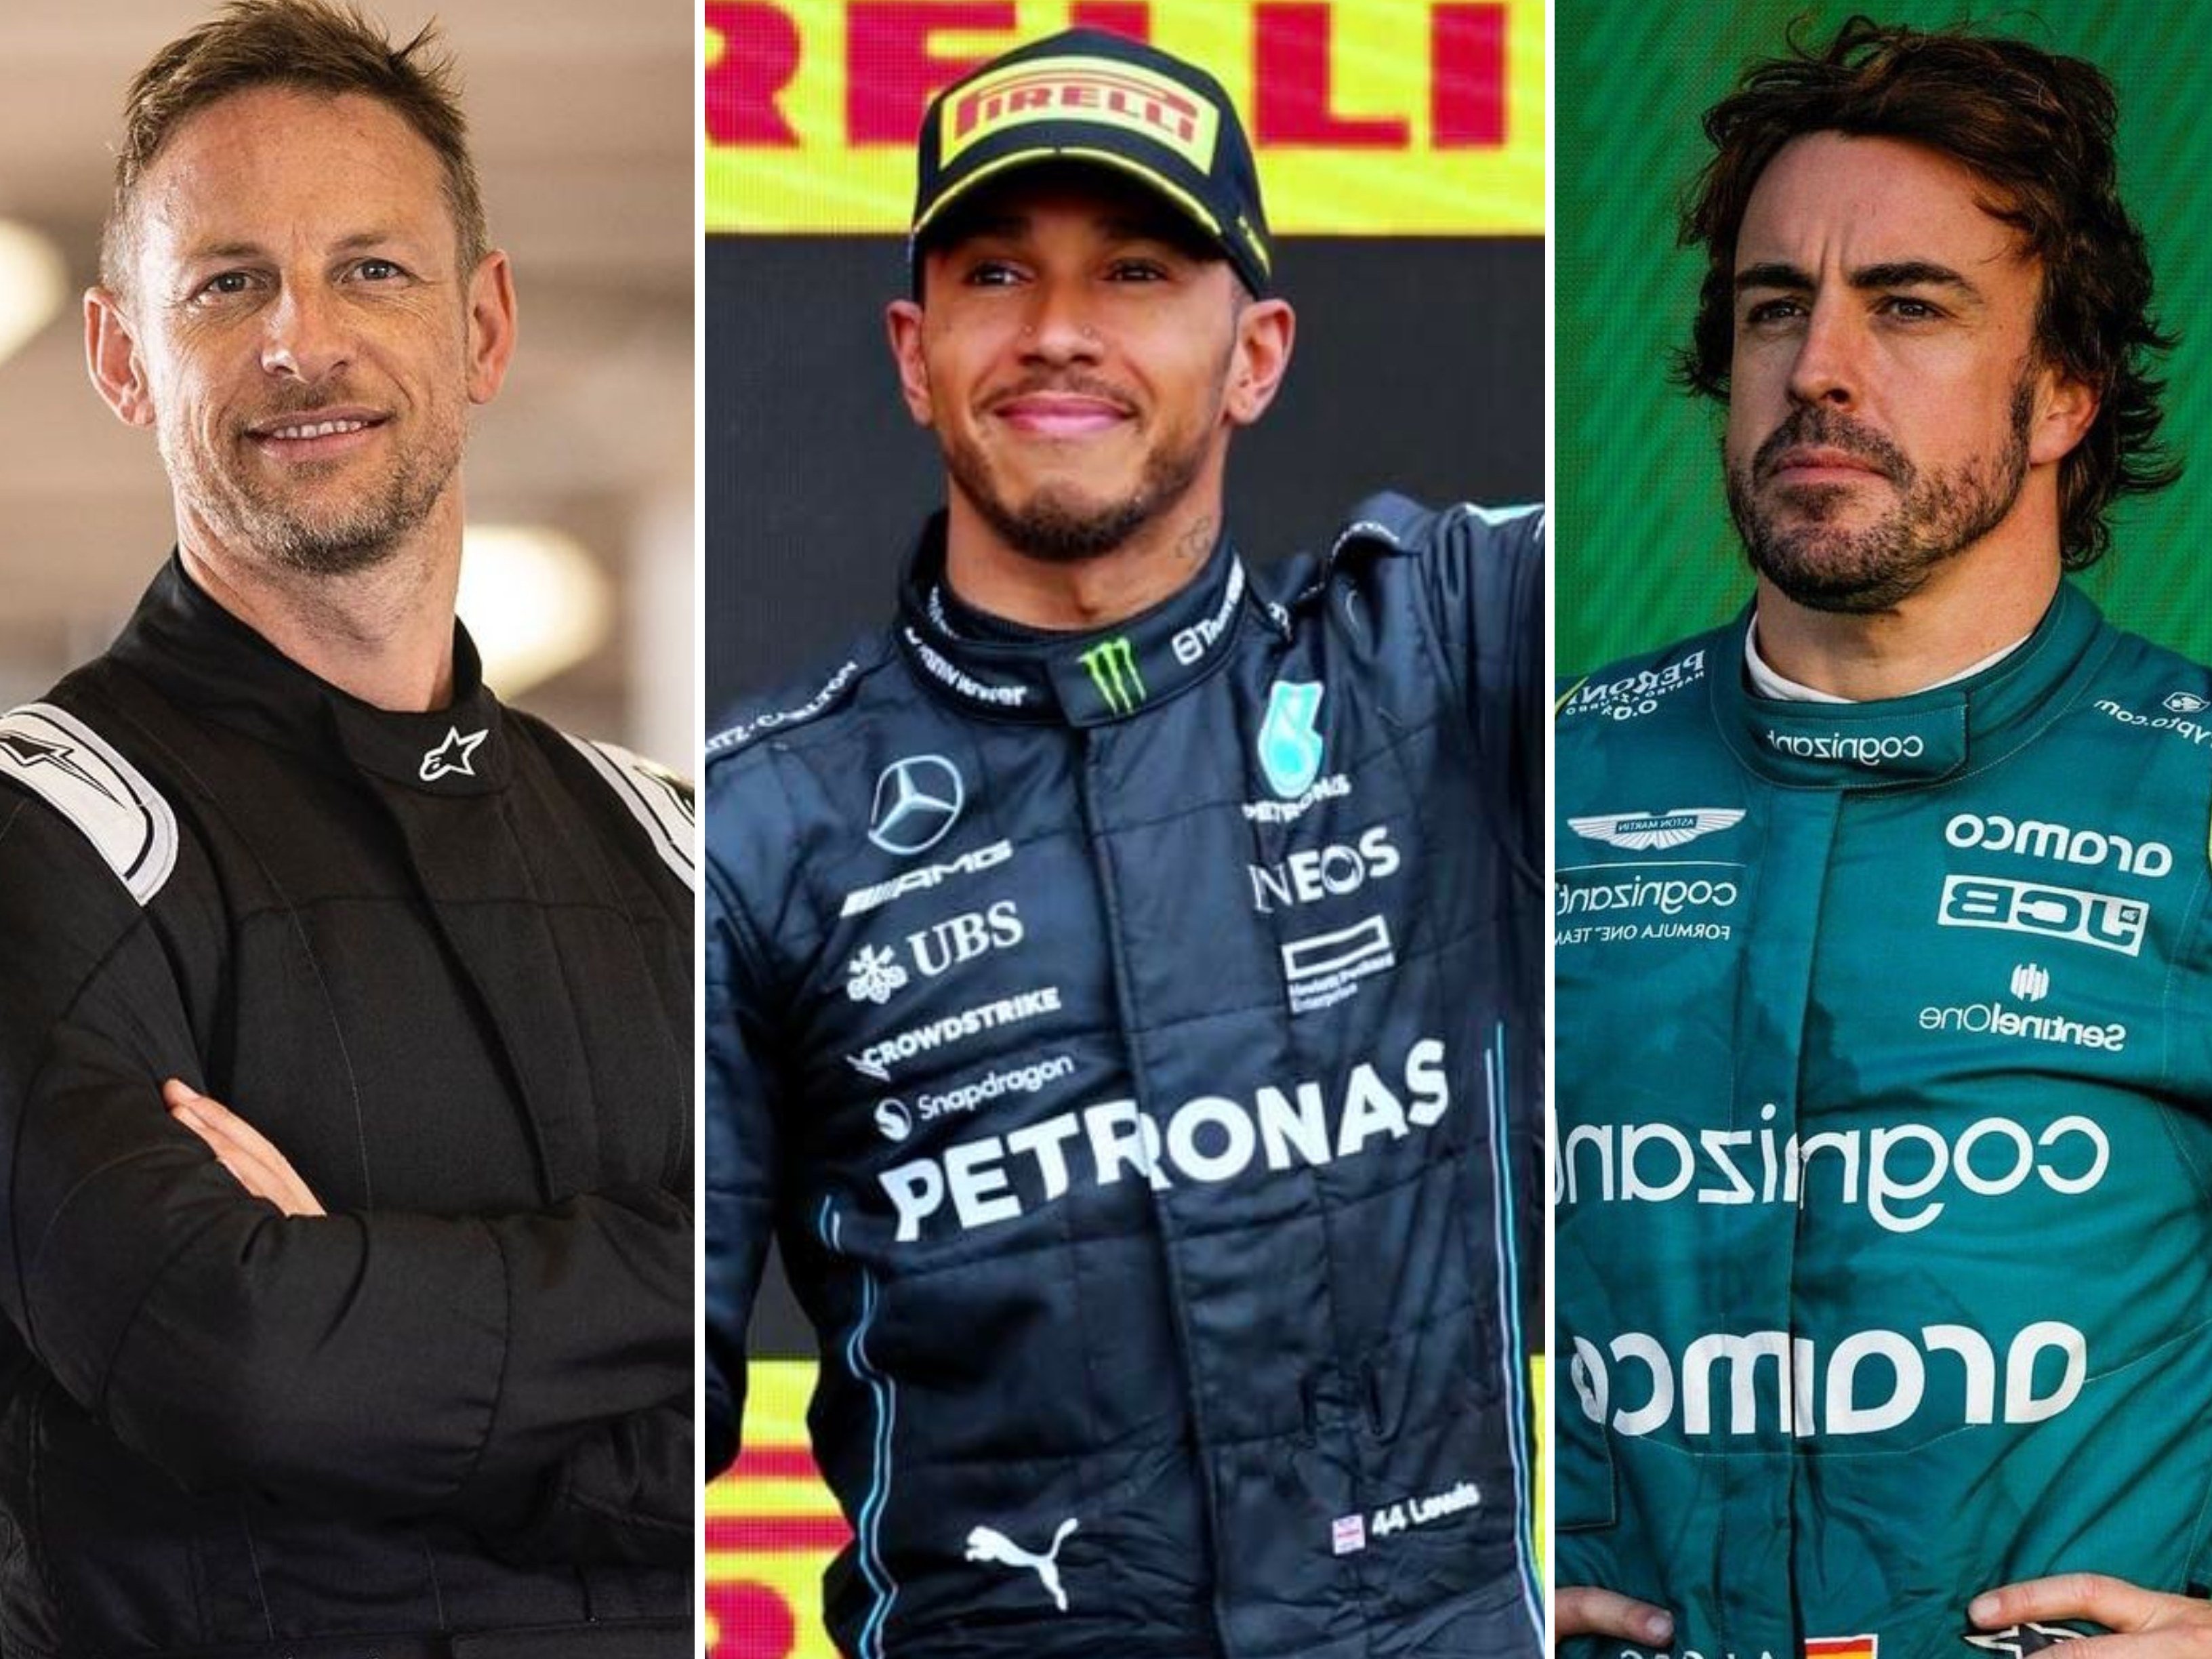 Who are the richest F1 drivers ever? From Jenson Button and Lewis Hamilton to Fernando Alonso. Photos: @jensonbutton, @lewishamilton, @fernandoalo_oficial/Instagram